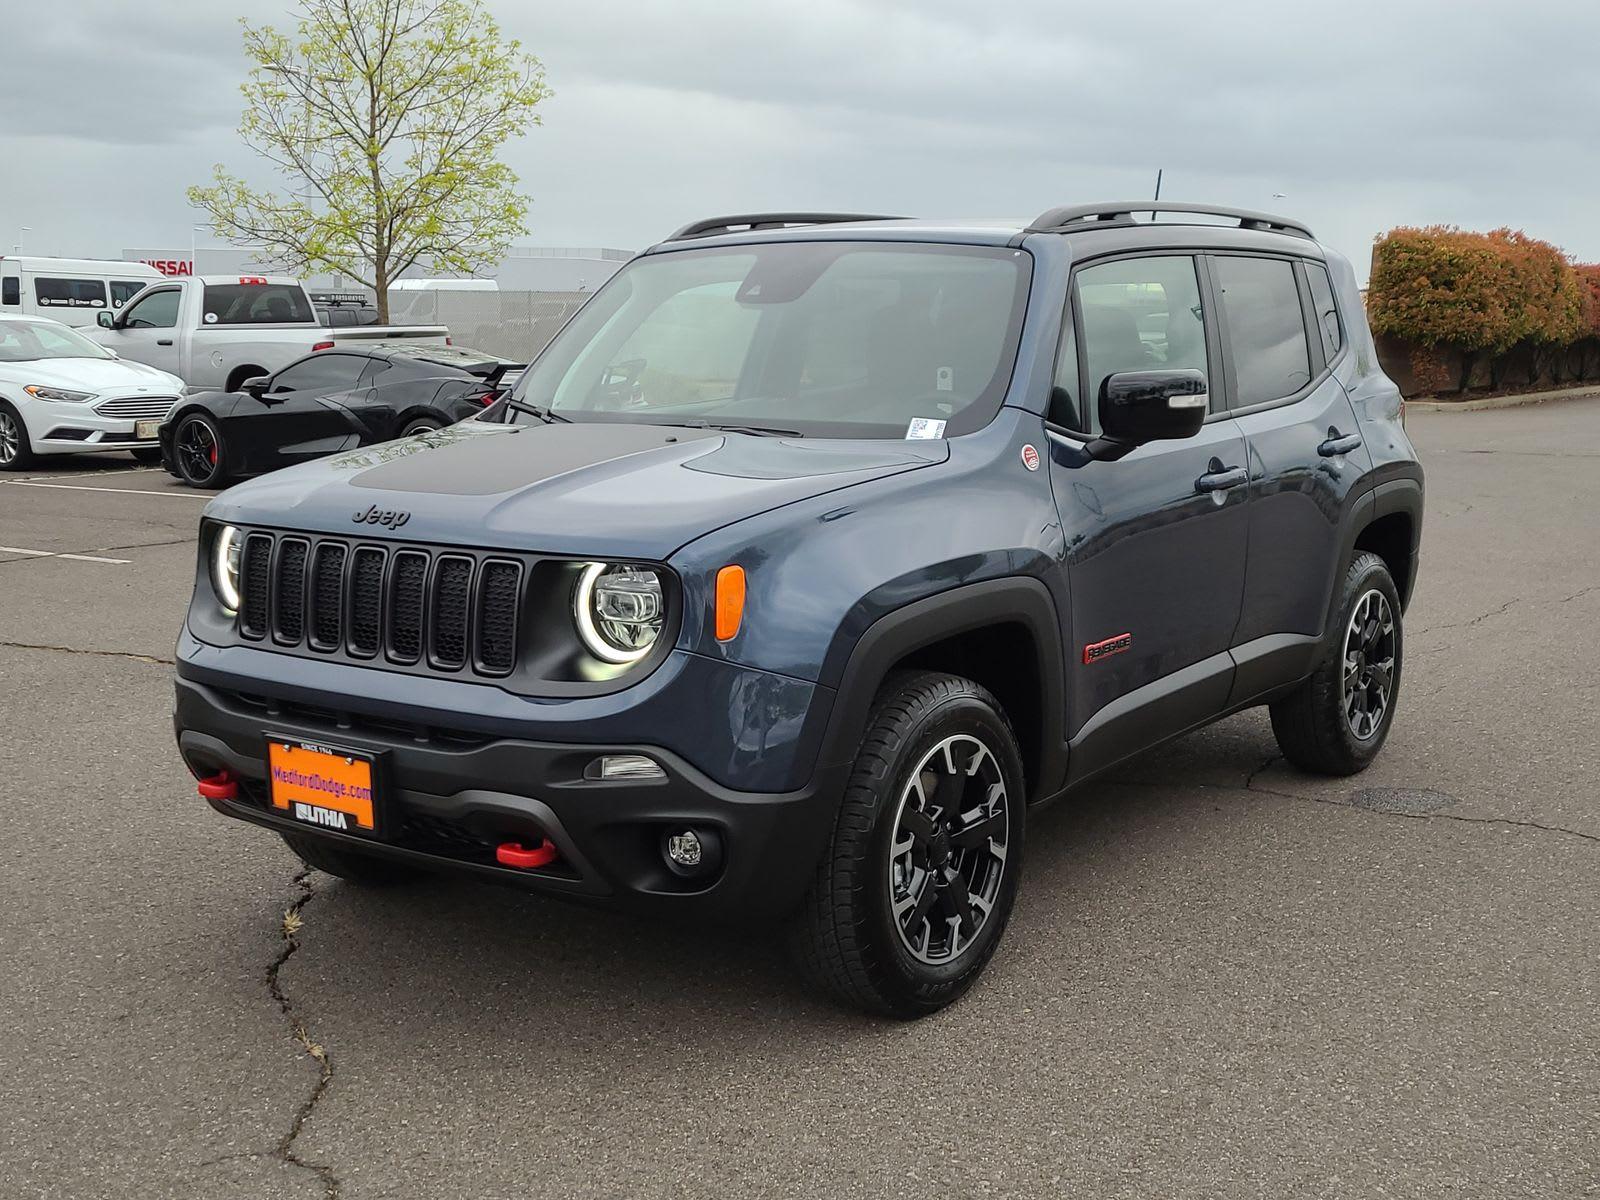 2023 Jeep Renegade Altitude in Slate Blue Pearl-Coat Exterior Paint for  Sale - Rolla, MO